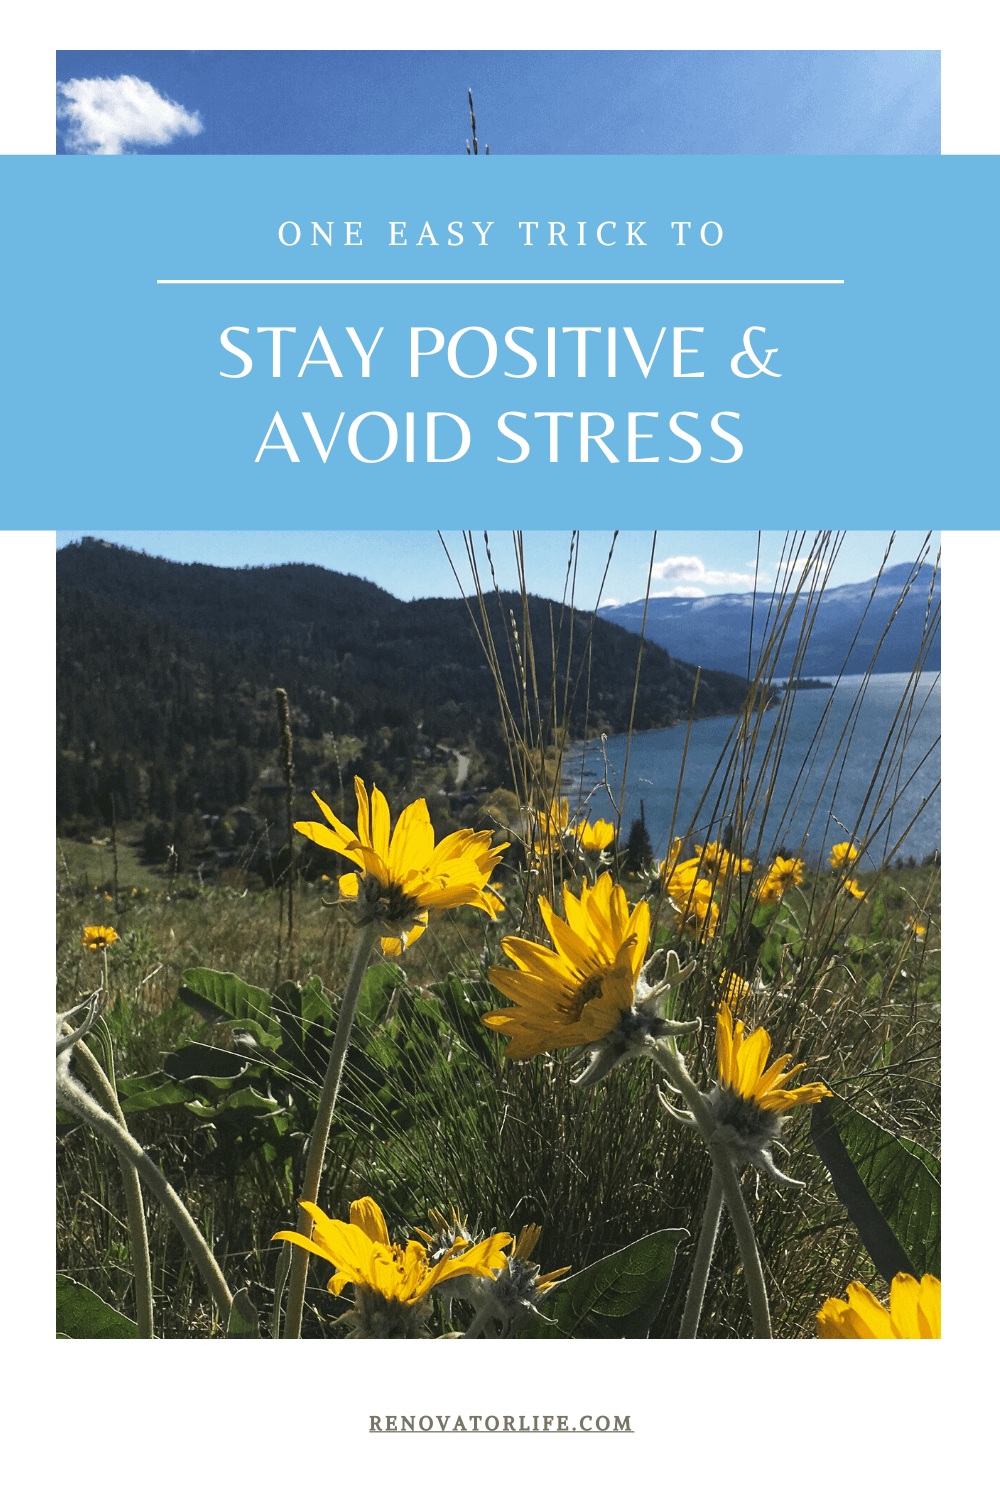 Stay Positive and Avoid Stress